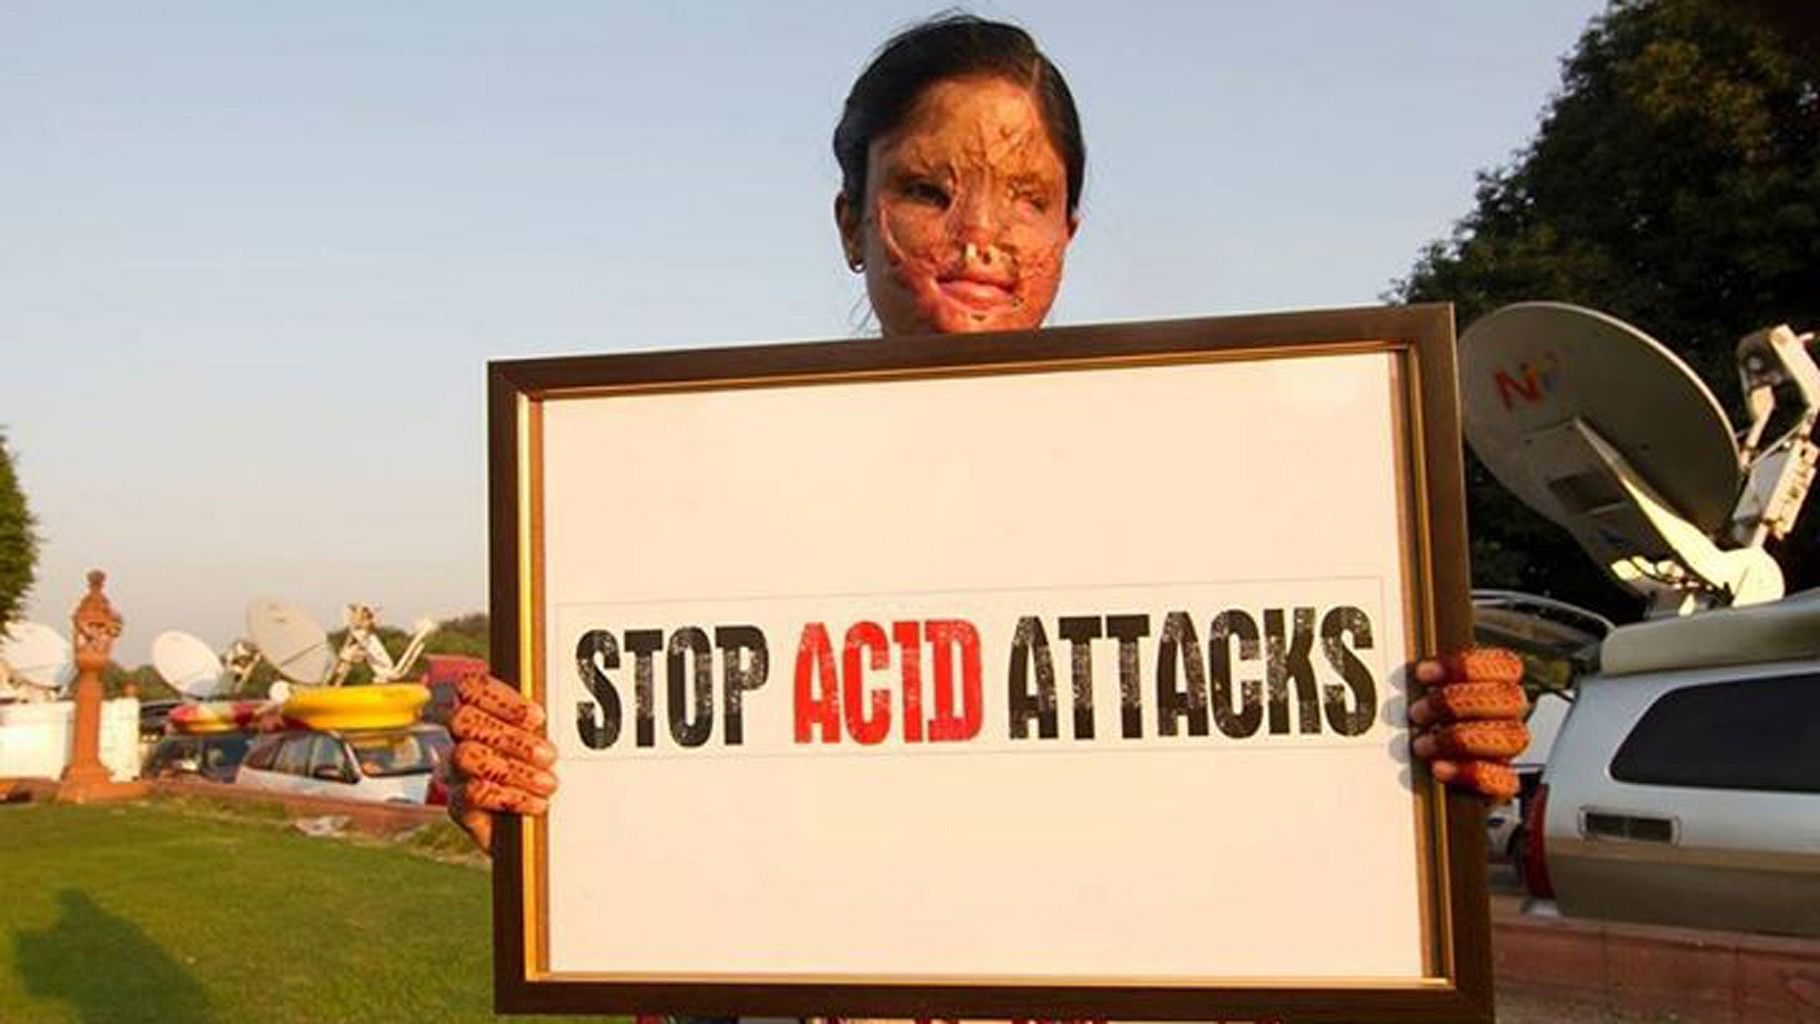 The petition demanded for the compensation to be raised from Rs 3 lakhs to Rs 12 lakhs for acid attack survivors. Image used for representational purposes.